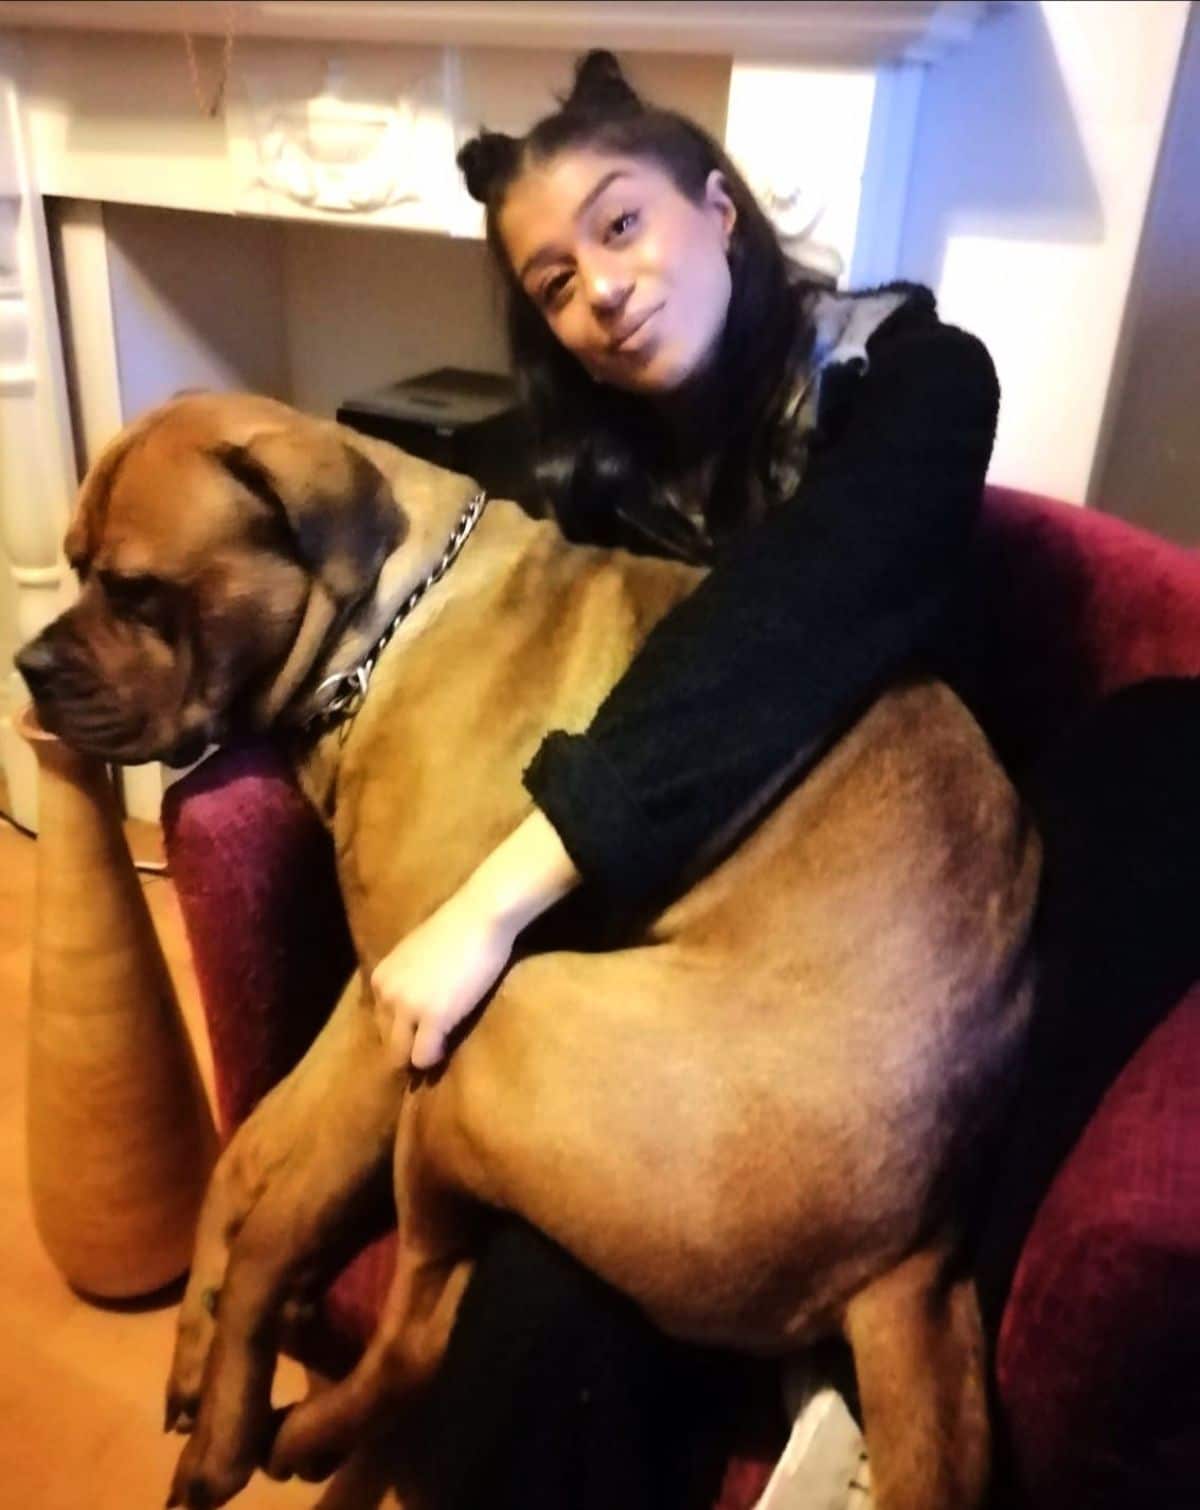 large brown dog sitting on a woman's lap.jfif